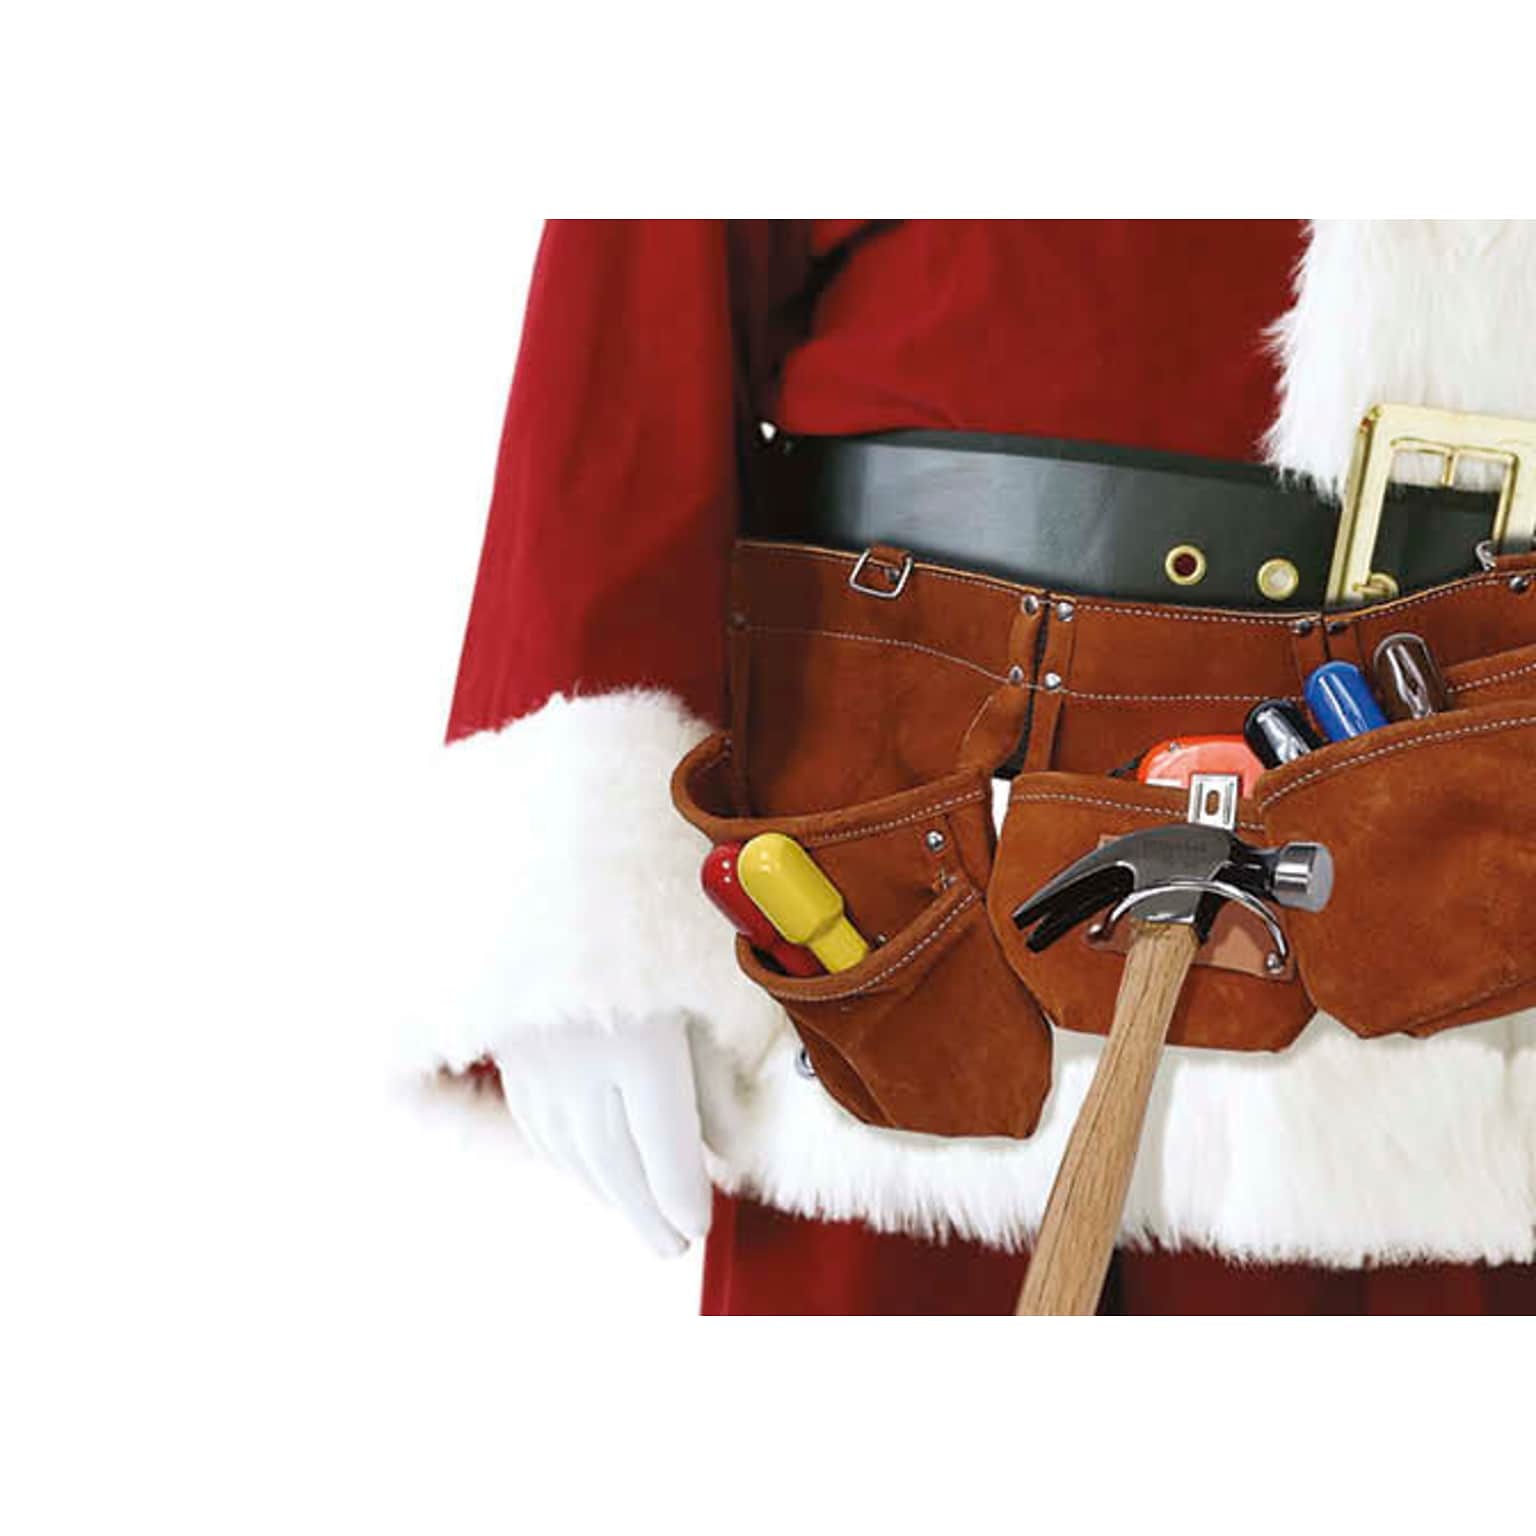 Seasons Greetings Tool Belt On Santa Holiday Greeting Cards, With A7 Envelopes, 7 x 5, 25 Cards per Set